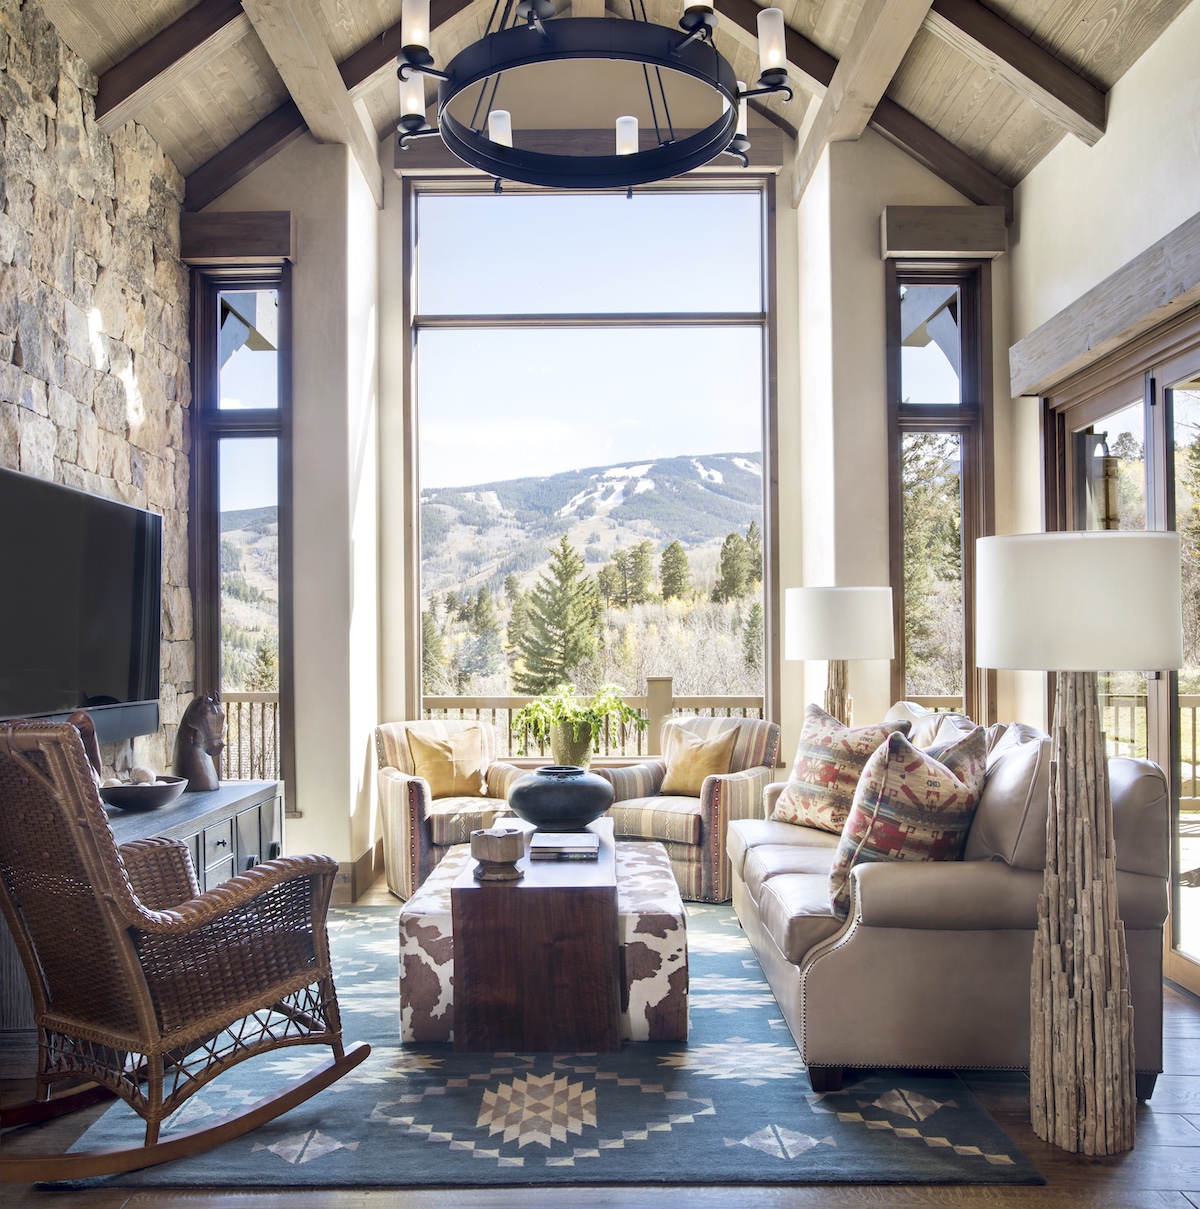 Courtney St. John’s new business brings a happy mix of fine arts, construction expertise and a passion for collaboration to Colorado high-country interiors (photo by Gibeon Photography).